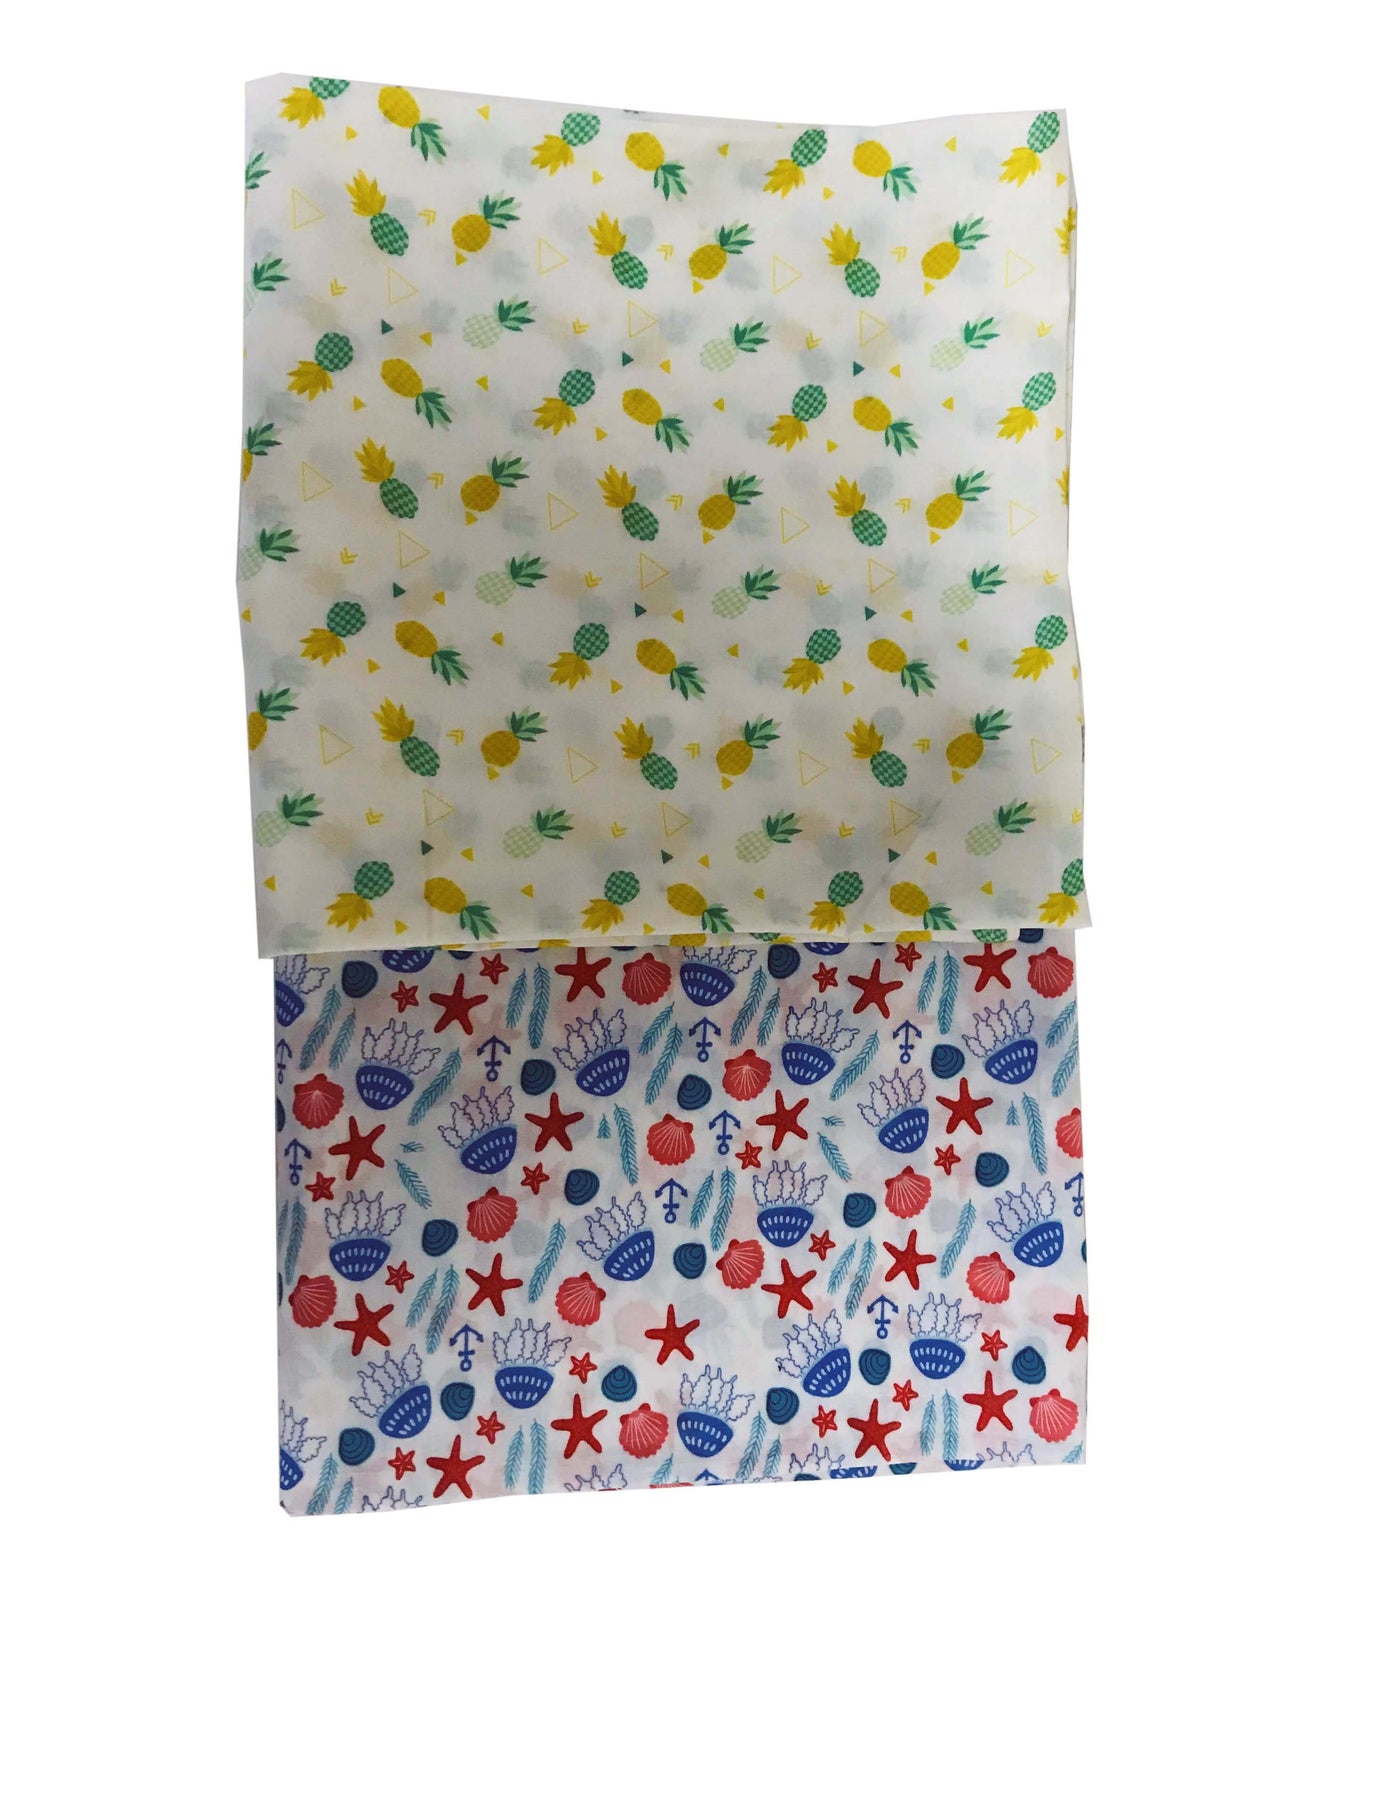 Swaddles - Pineapple and Star Print Joey Care